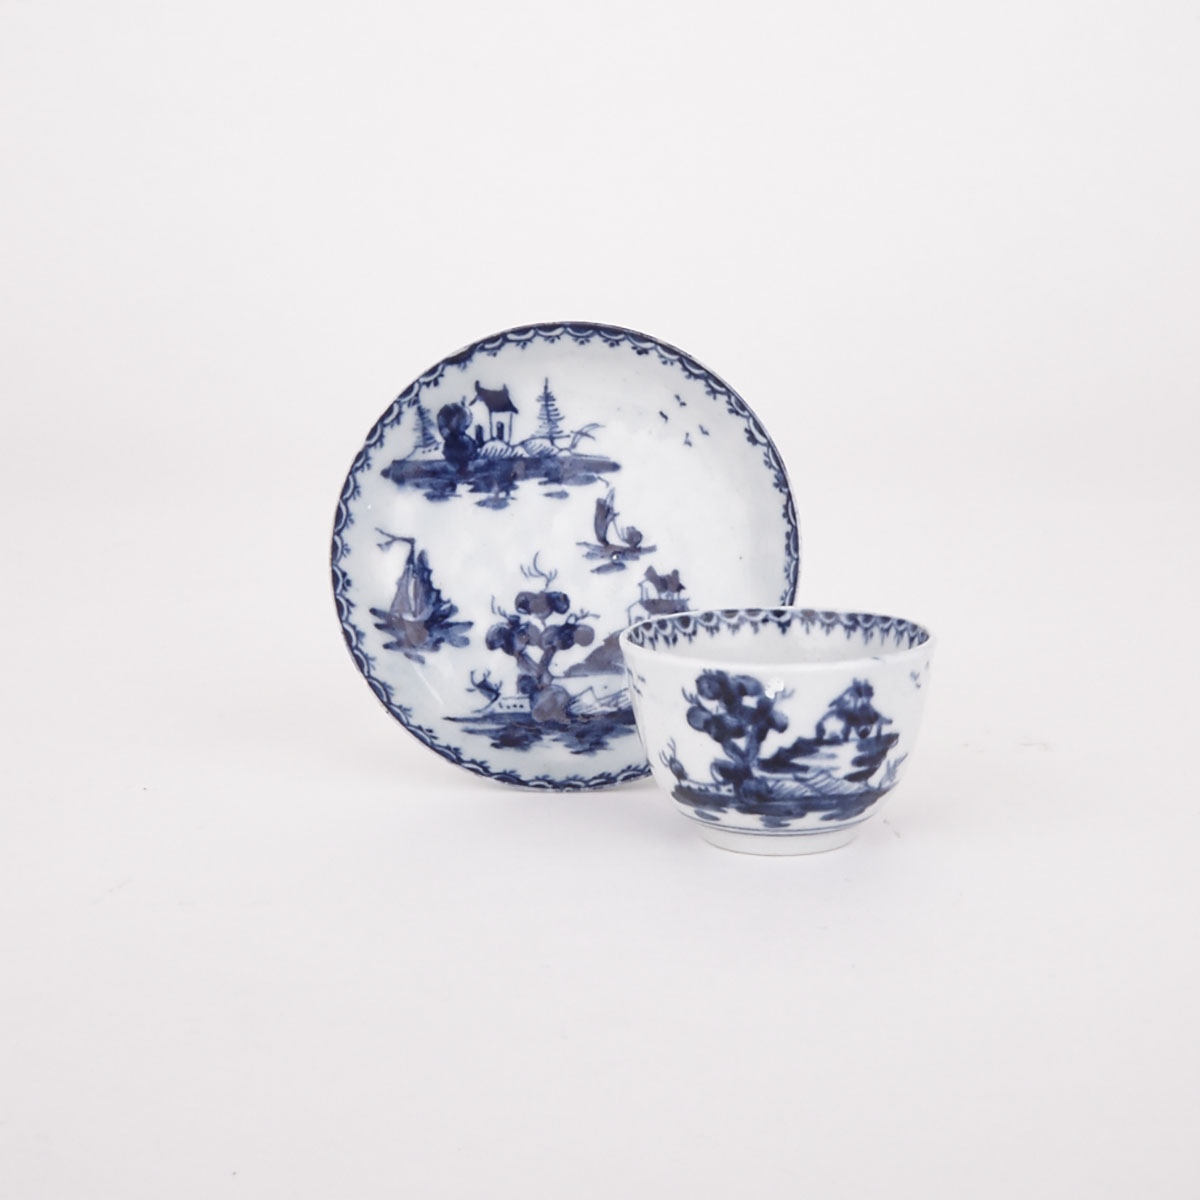 Lowestoft Toy Tea Bowl and Saucer, c.1770